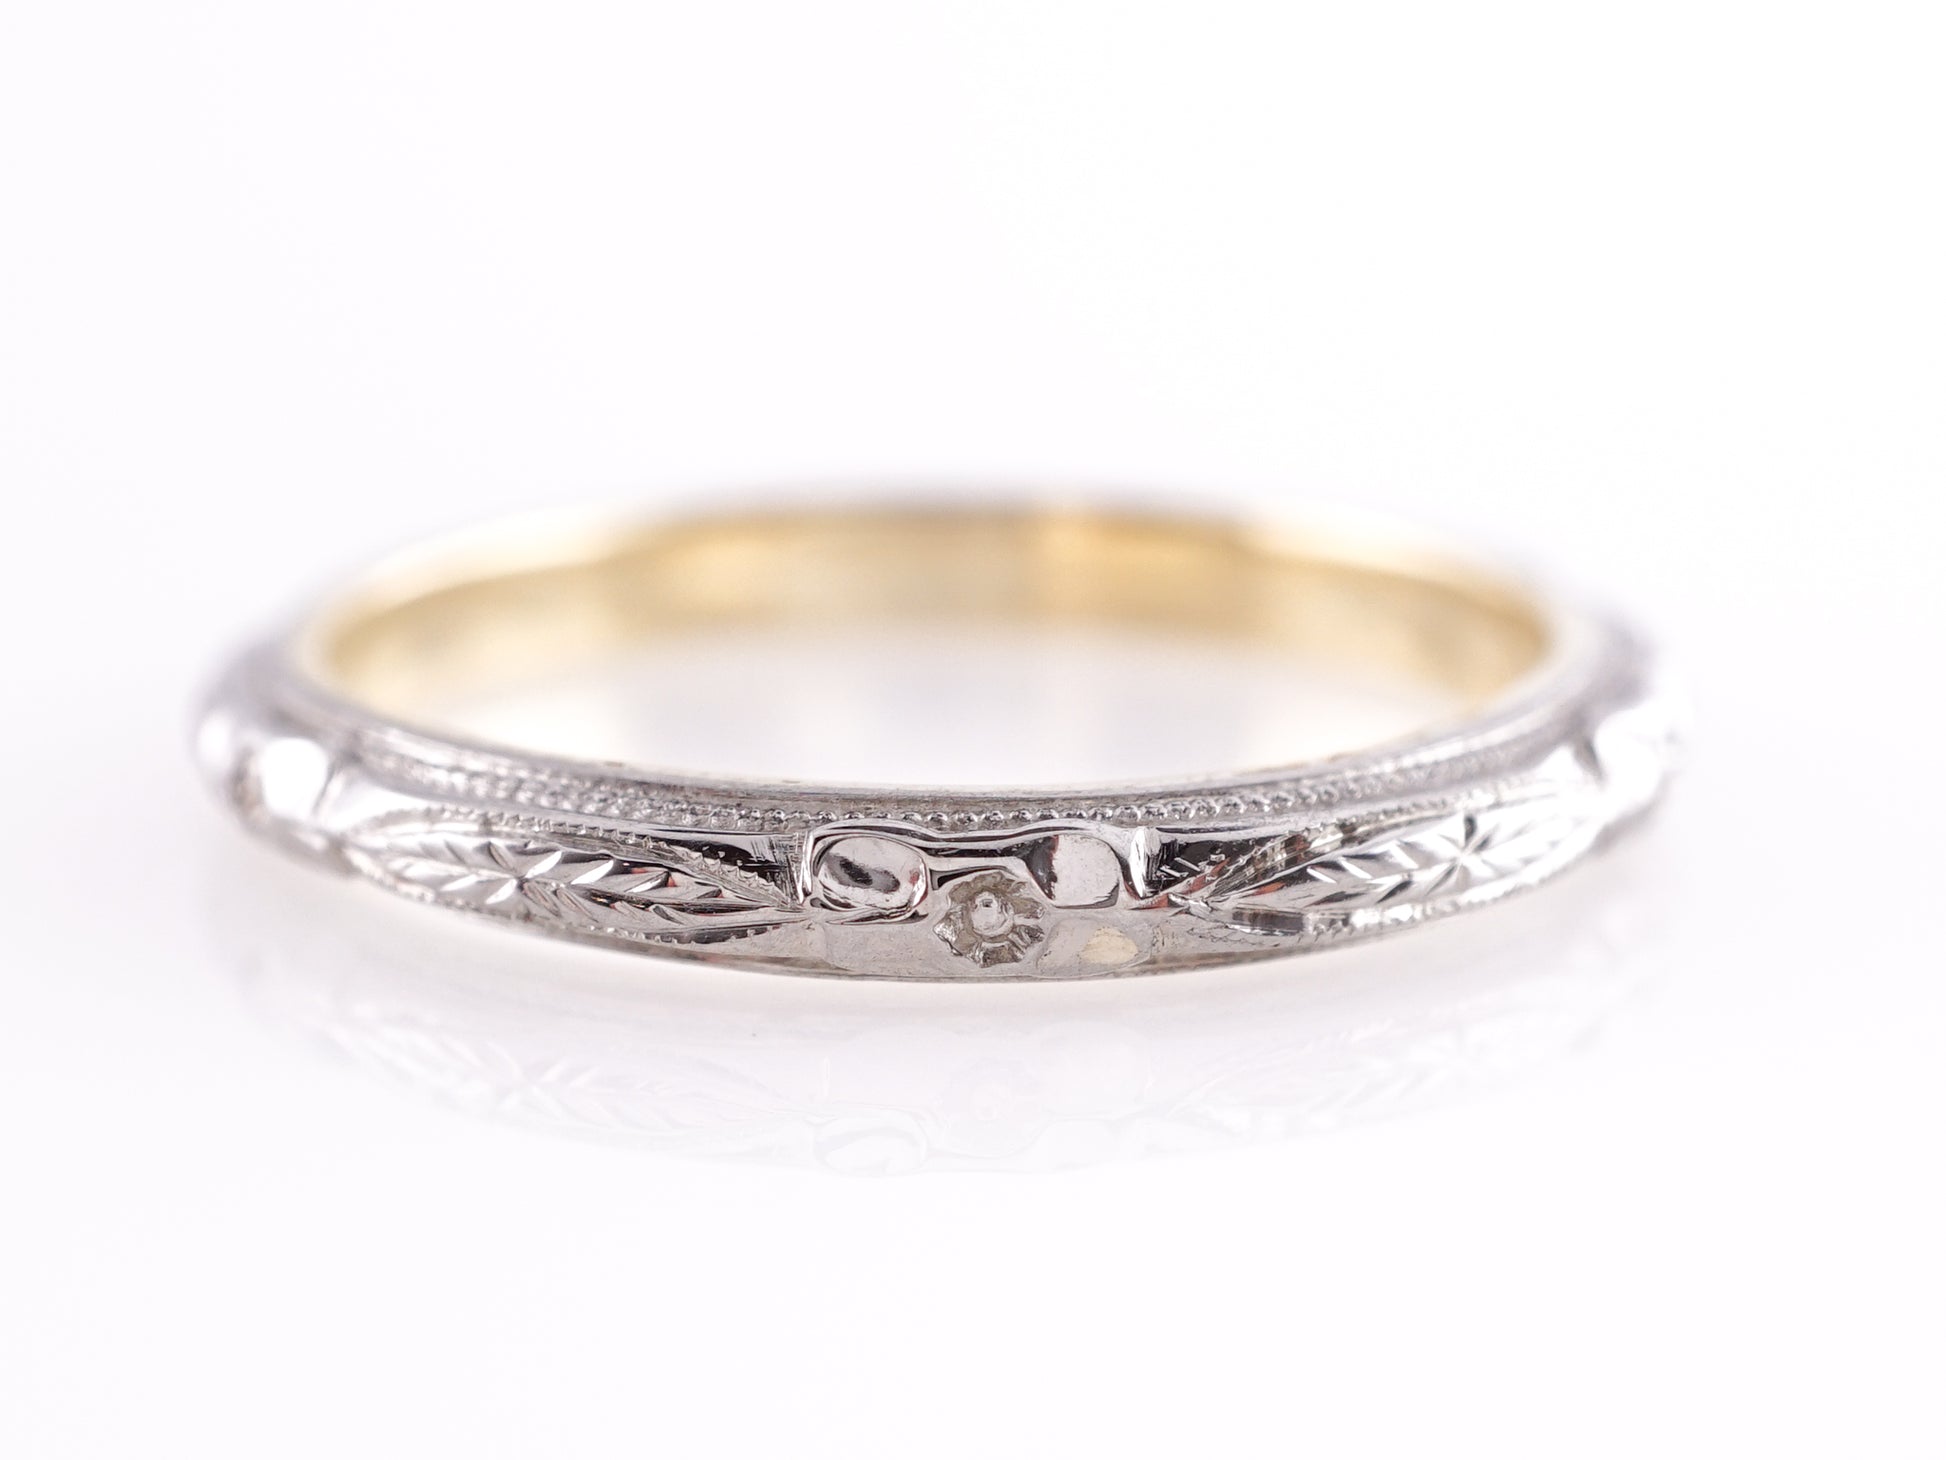 Vintage Two-Tone Art Deco Wedding Band in 18k